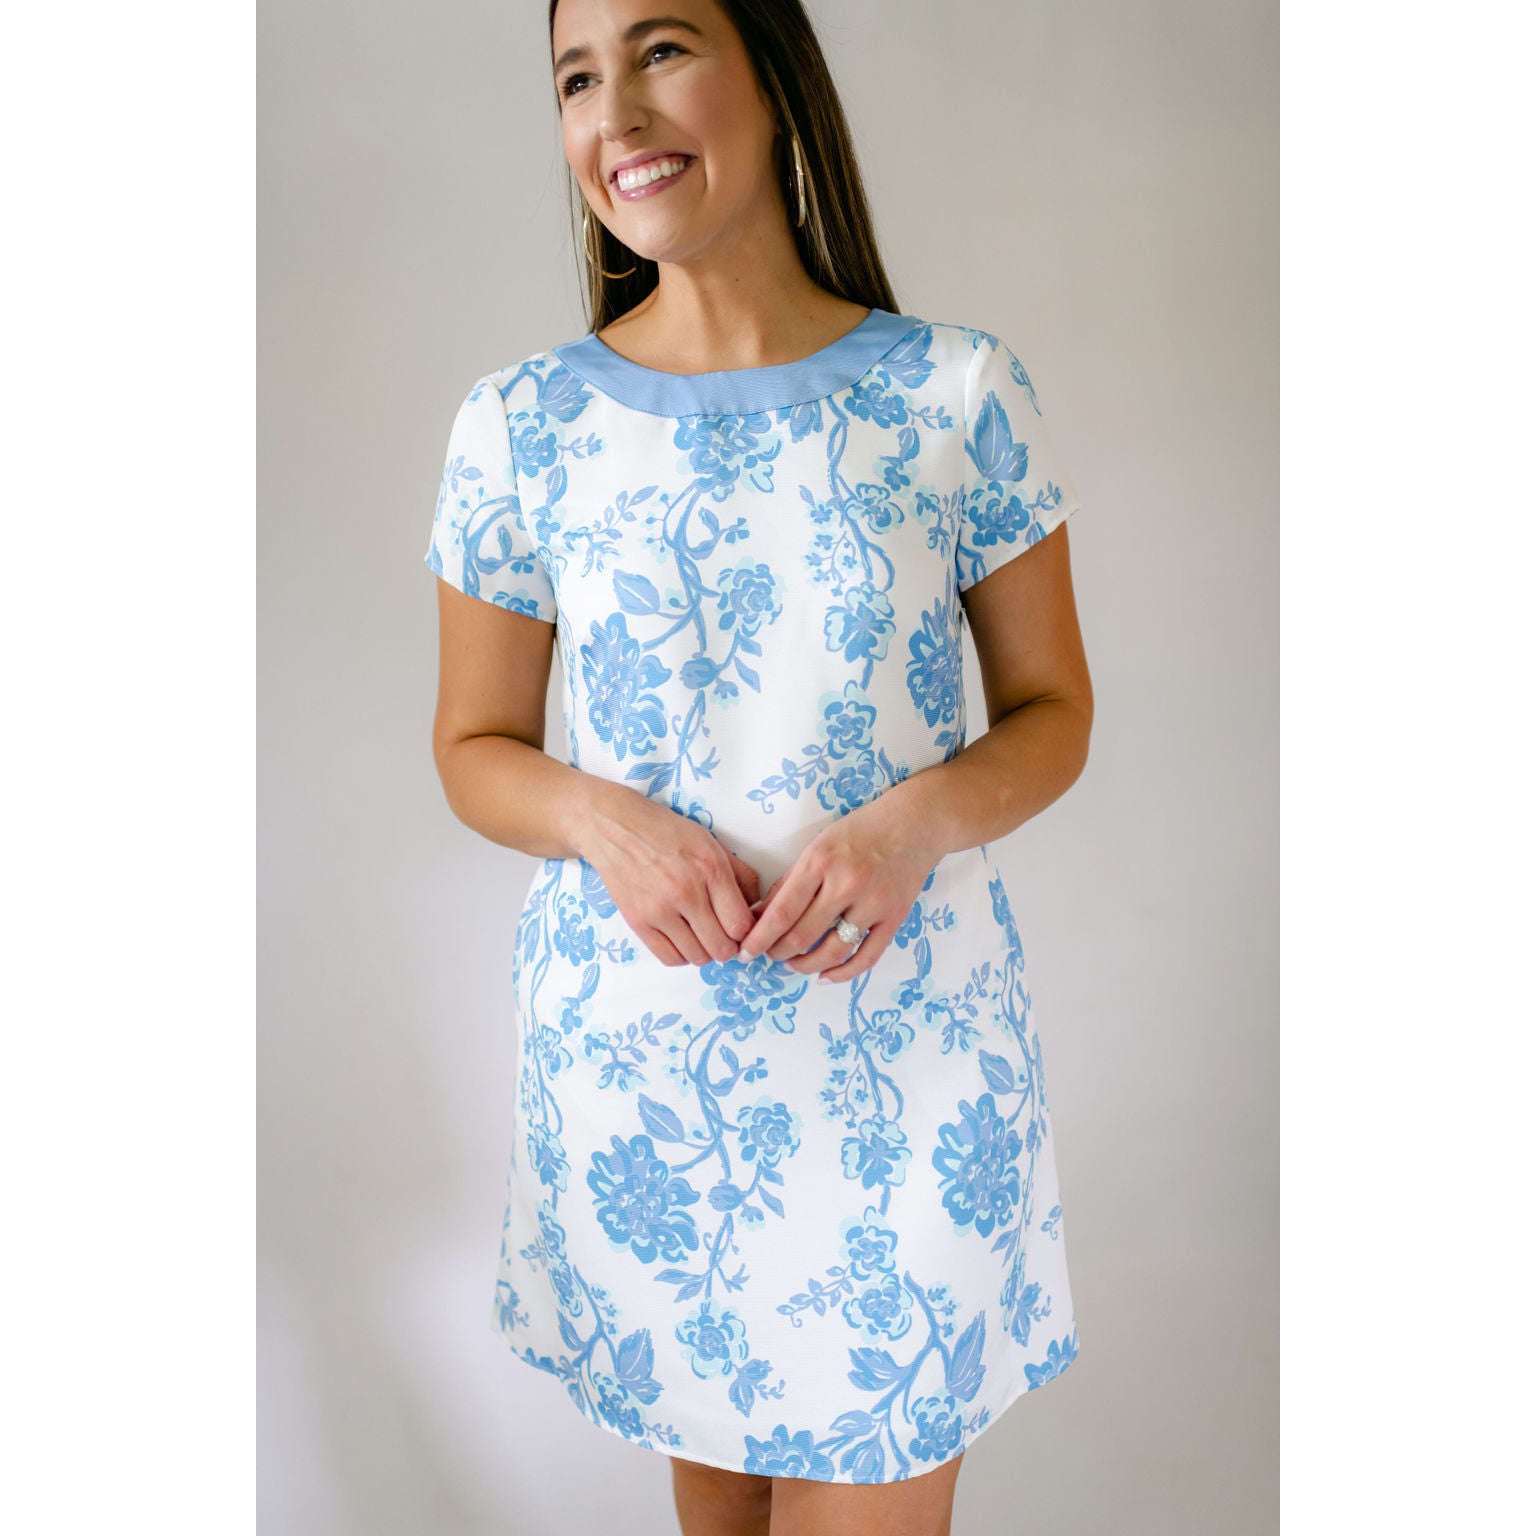 8.28 Boutique:Sail to Sable,Sail to Sable Printed Allie Bow Back Dress,Dress